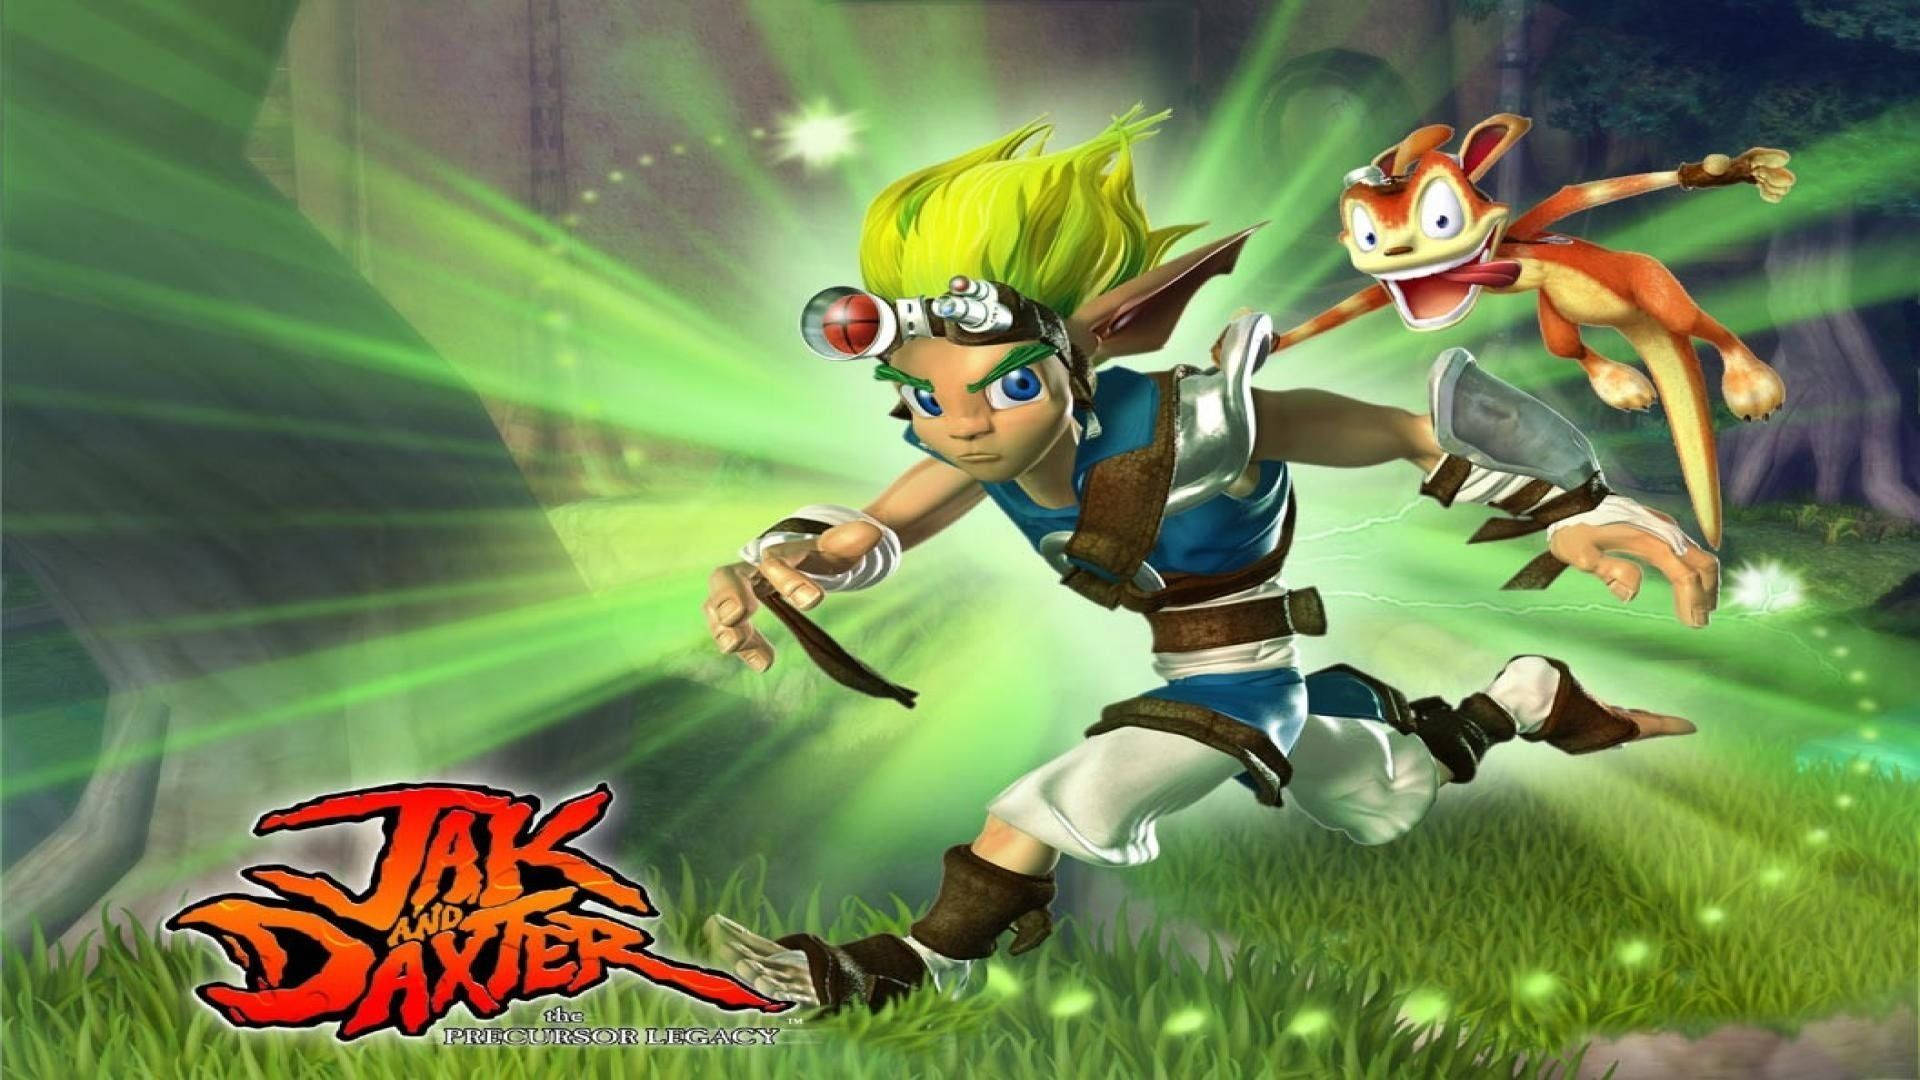 The fun duo - Jak and Daxter from the classic PlayStation game Wallpaper